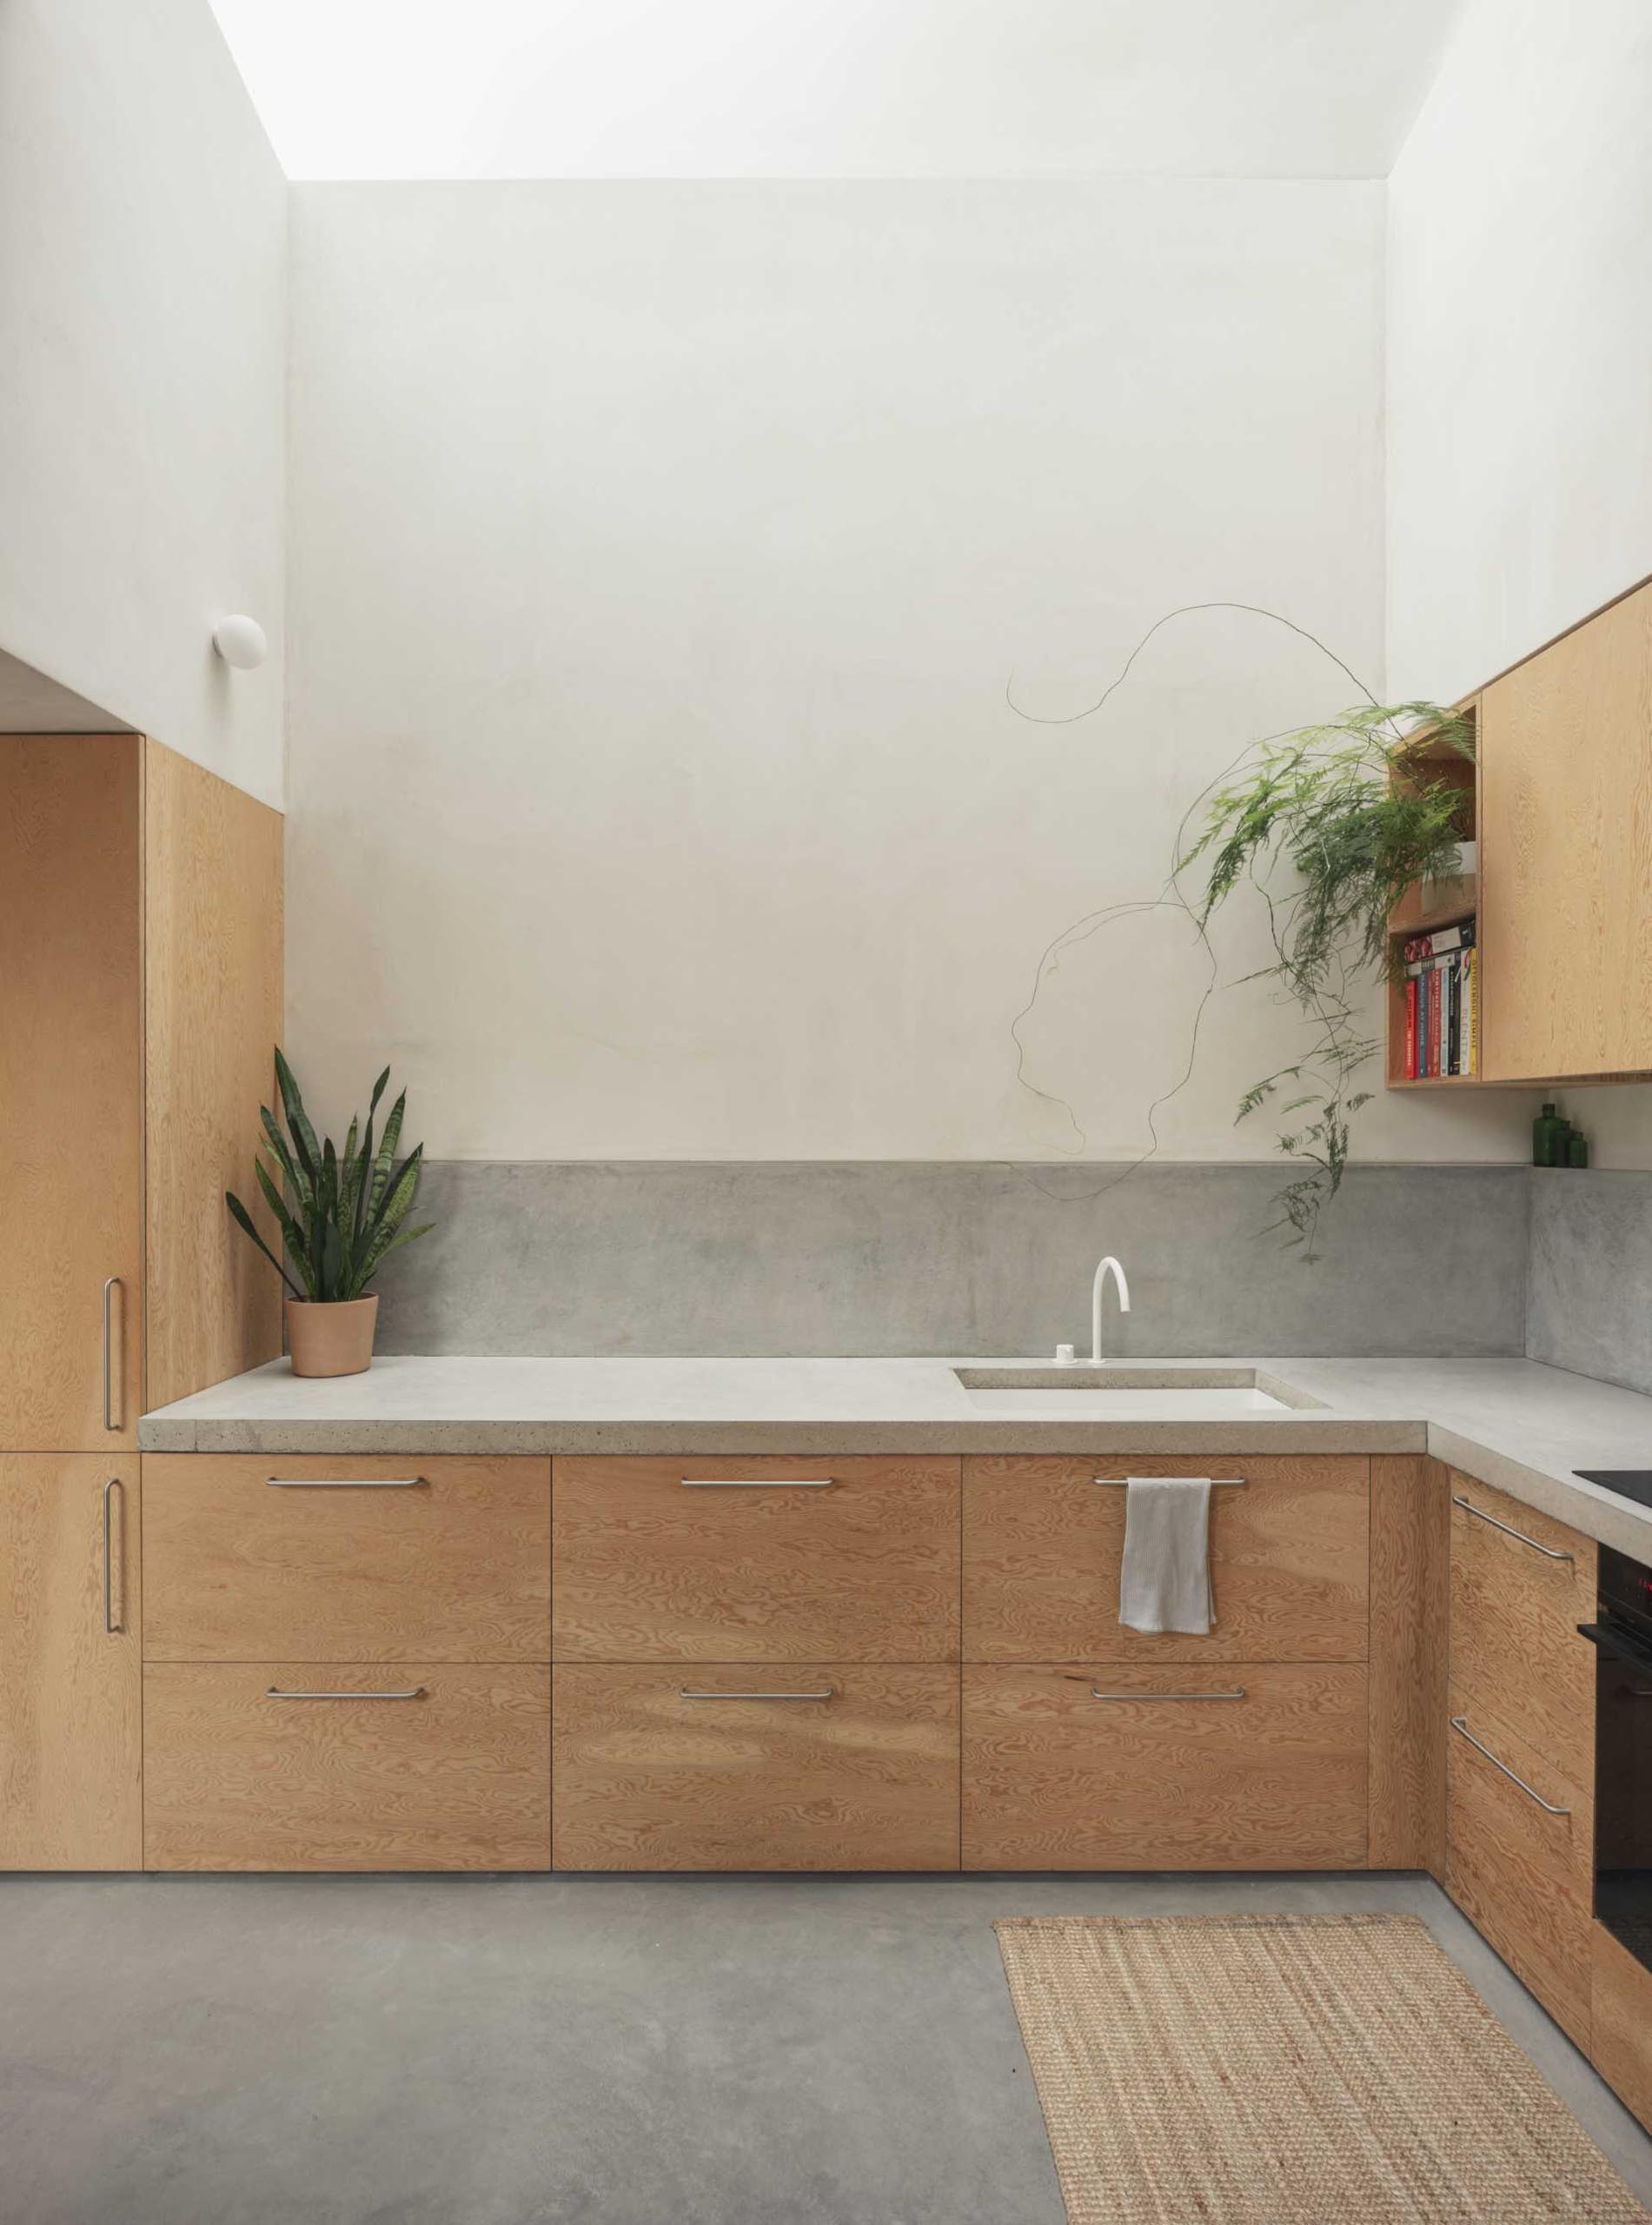 A modern kitchen with deep Douglas Fir wood cabinets, and undermount sink, and a concrete countertop.